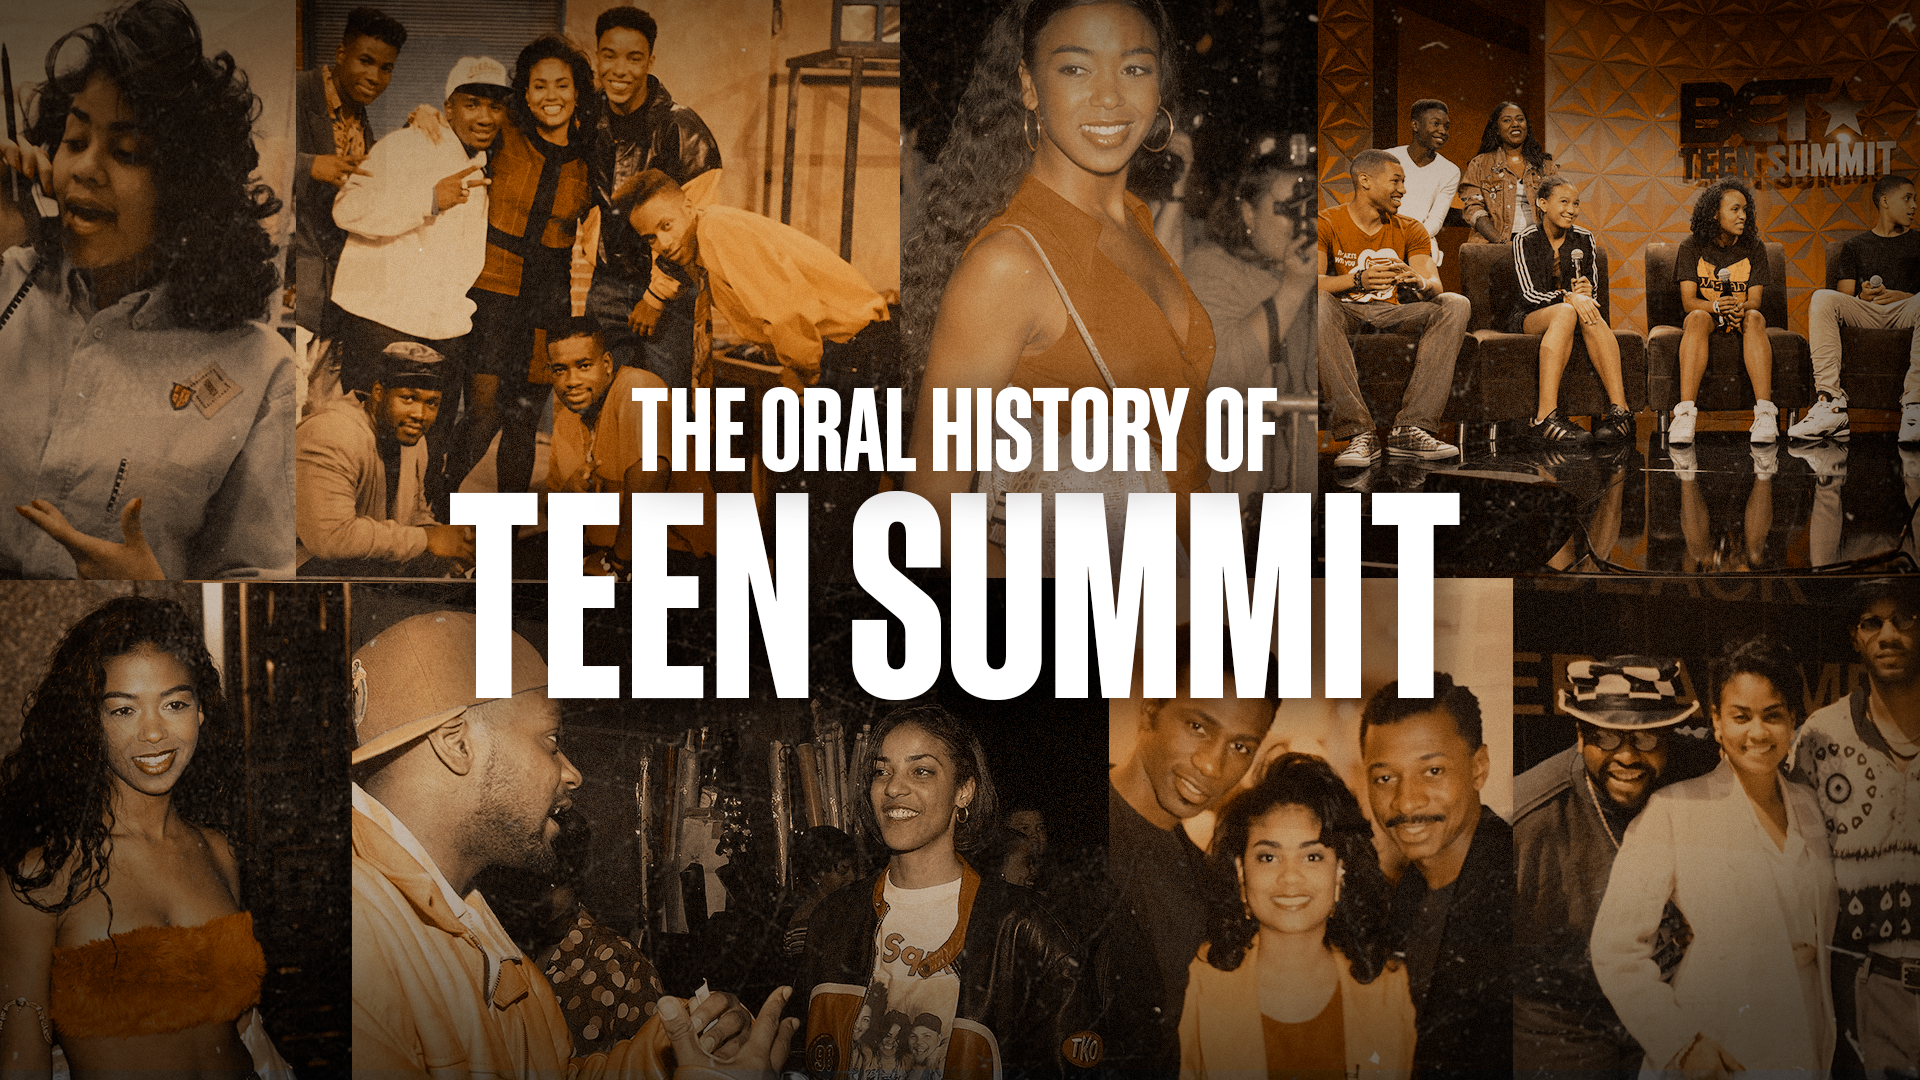 08202022-the-oral-history-bets-teen-summit